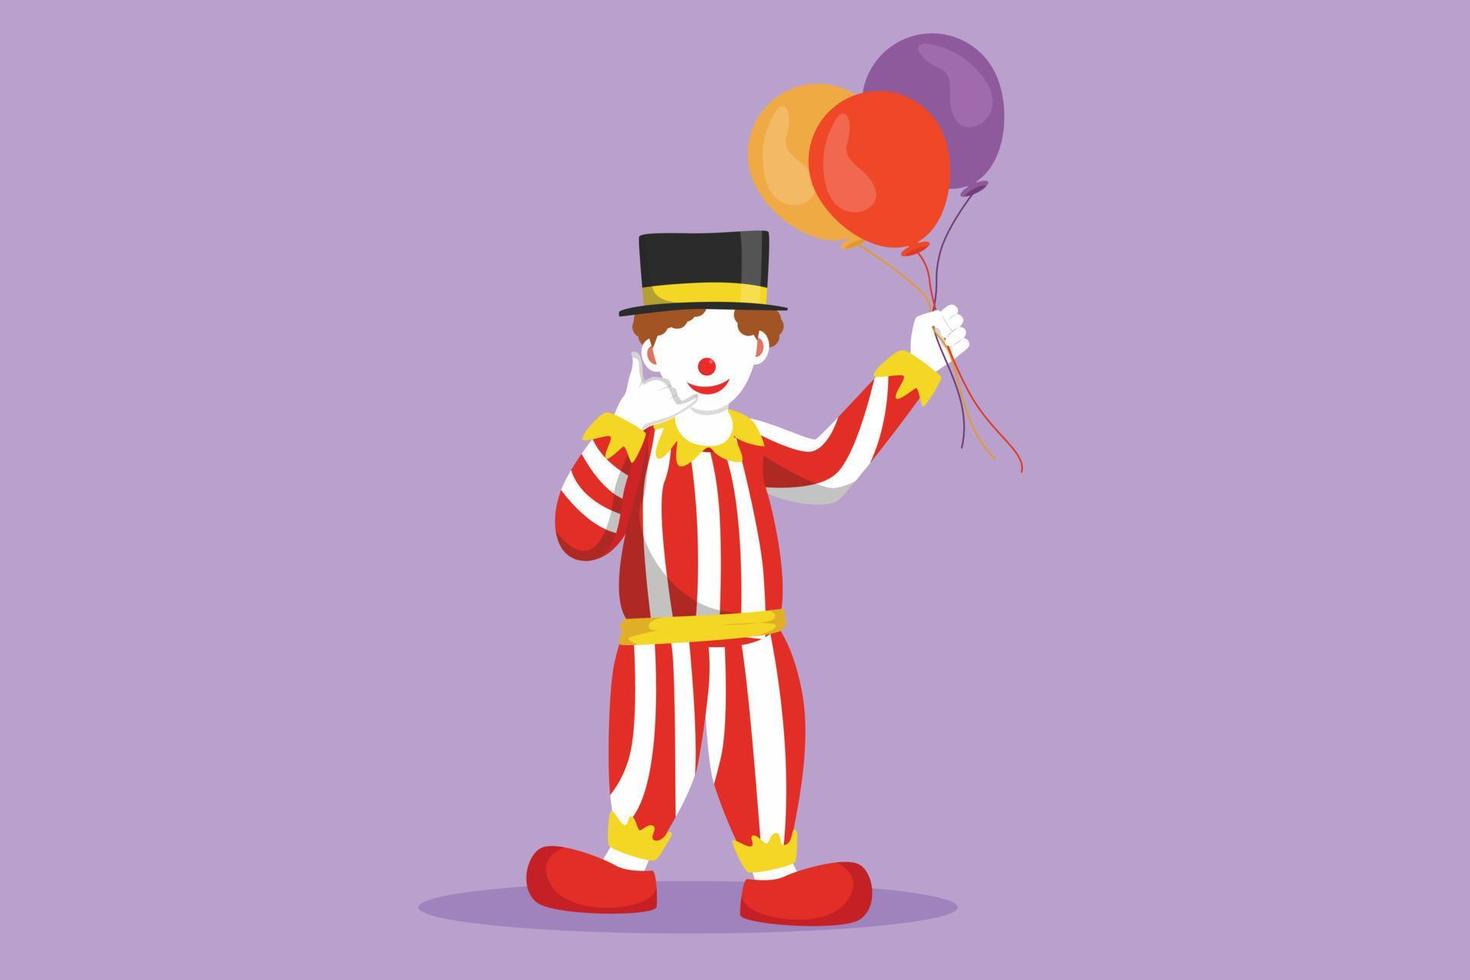 Cartoon flat style drawing funny clown standing and holding balloons with call me gesture, wearing hat and clown costume ready to entertain audience in circus arena. Graphic design vector illustration